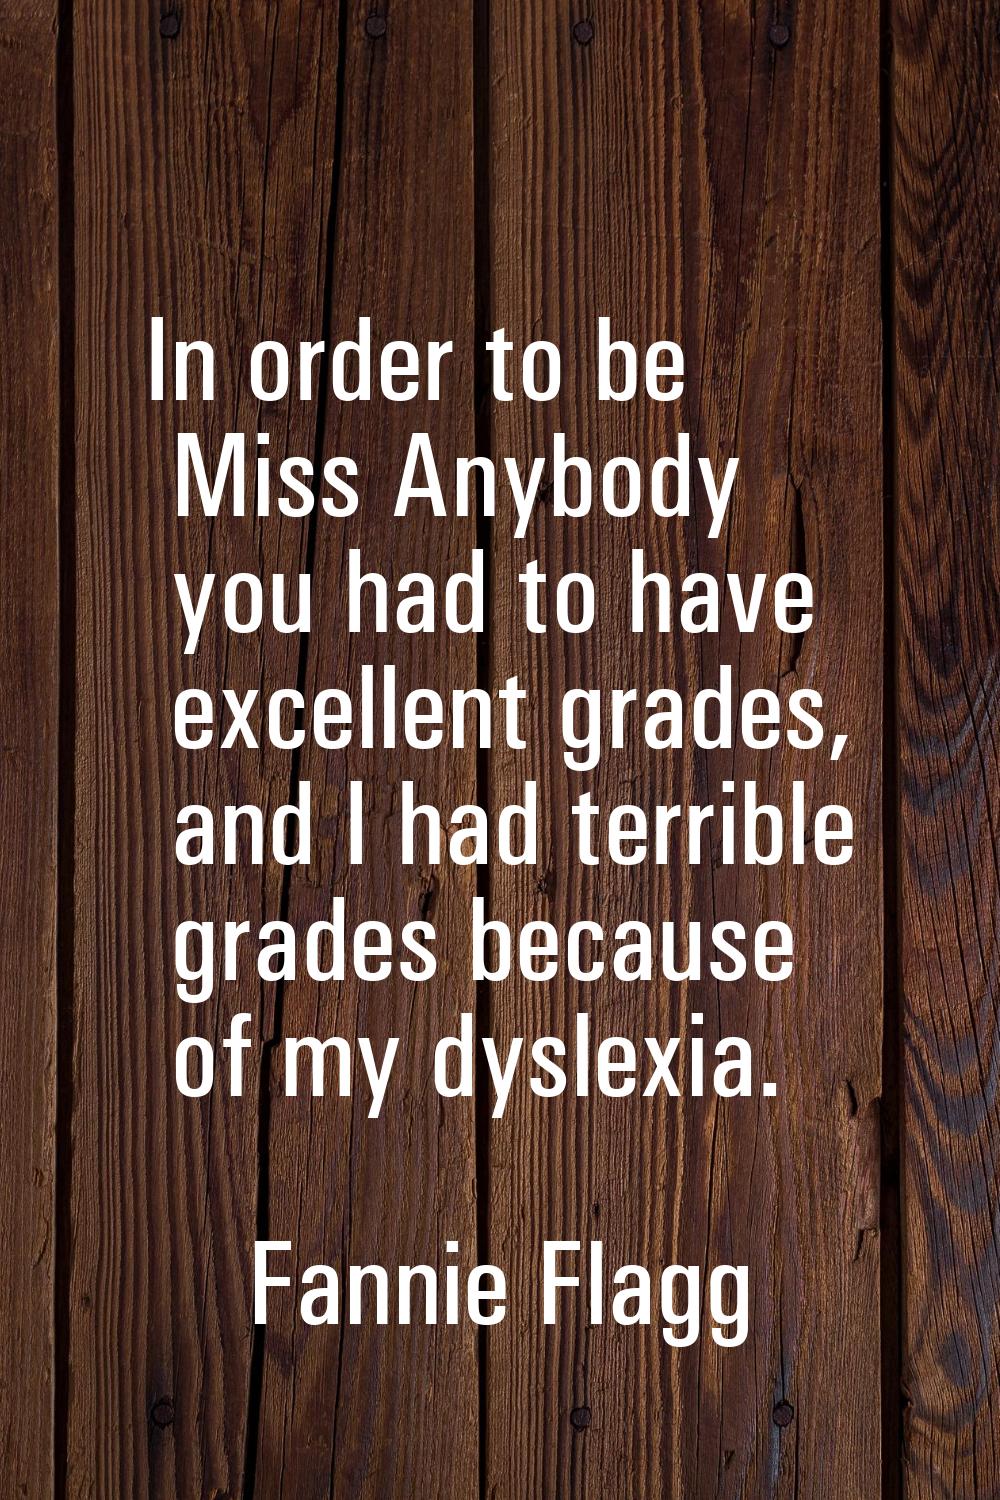 In order to be Miss Anybody you had to have excellent grades, and I had terrible grades because of 